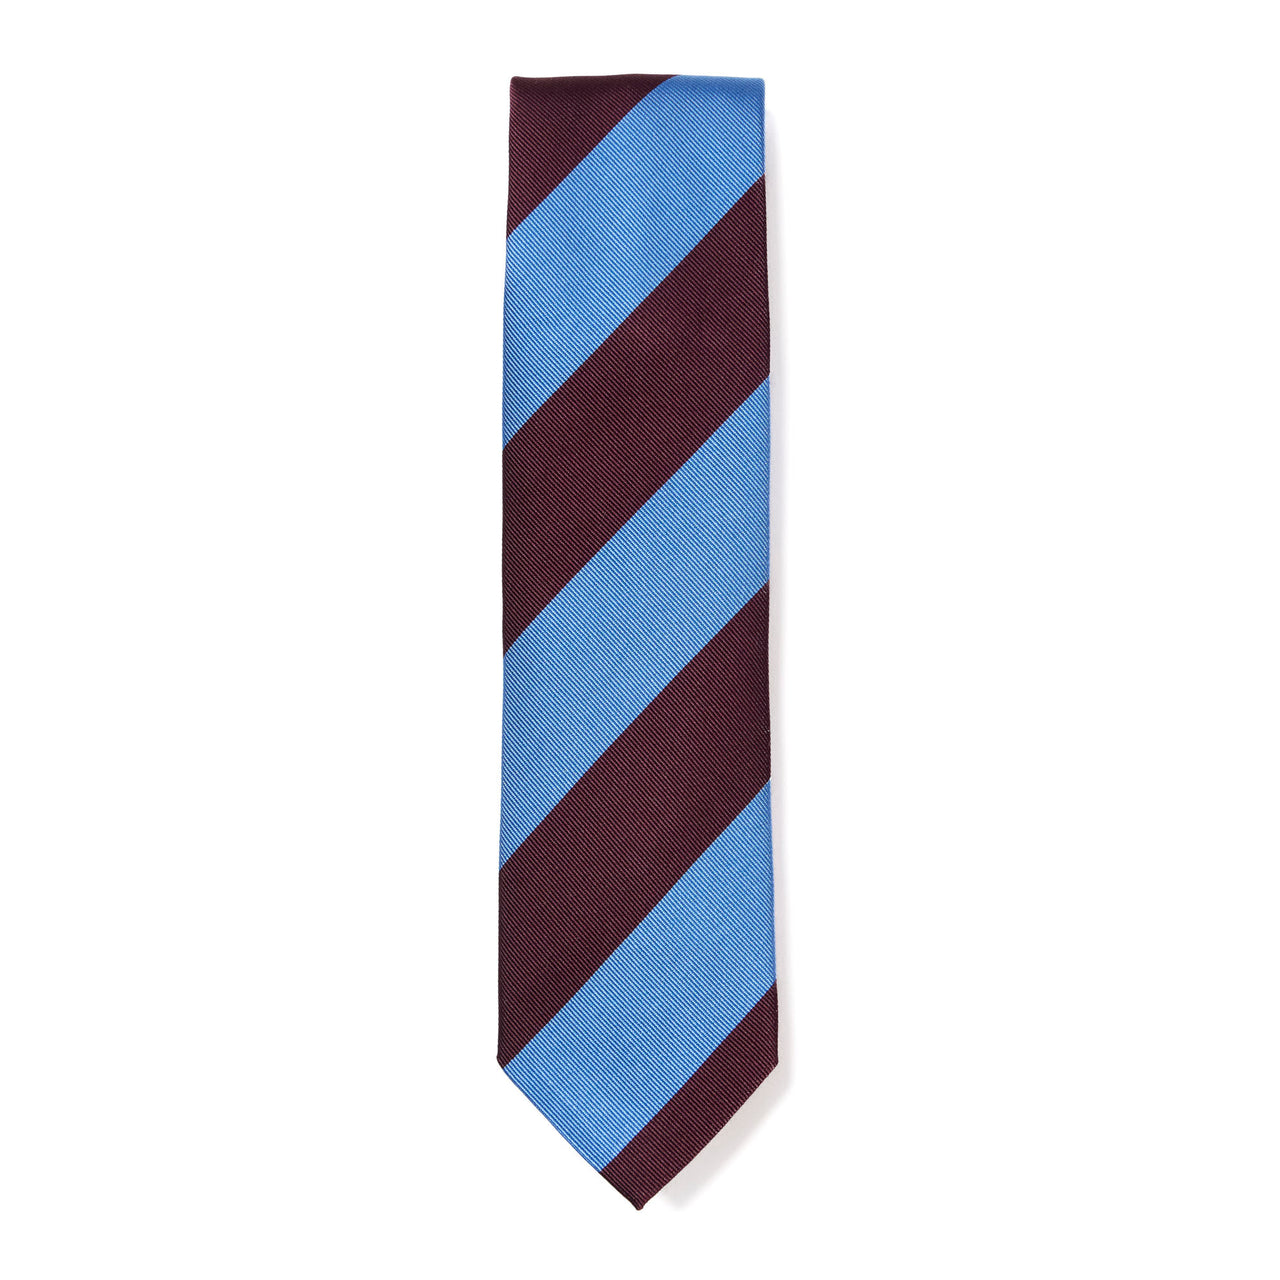 HENRY SARTORIAL X CANTINI Woven Stripe Tie MAROON/BLUE